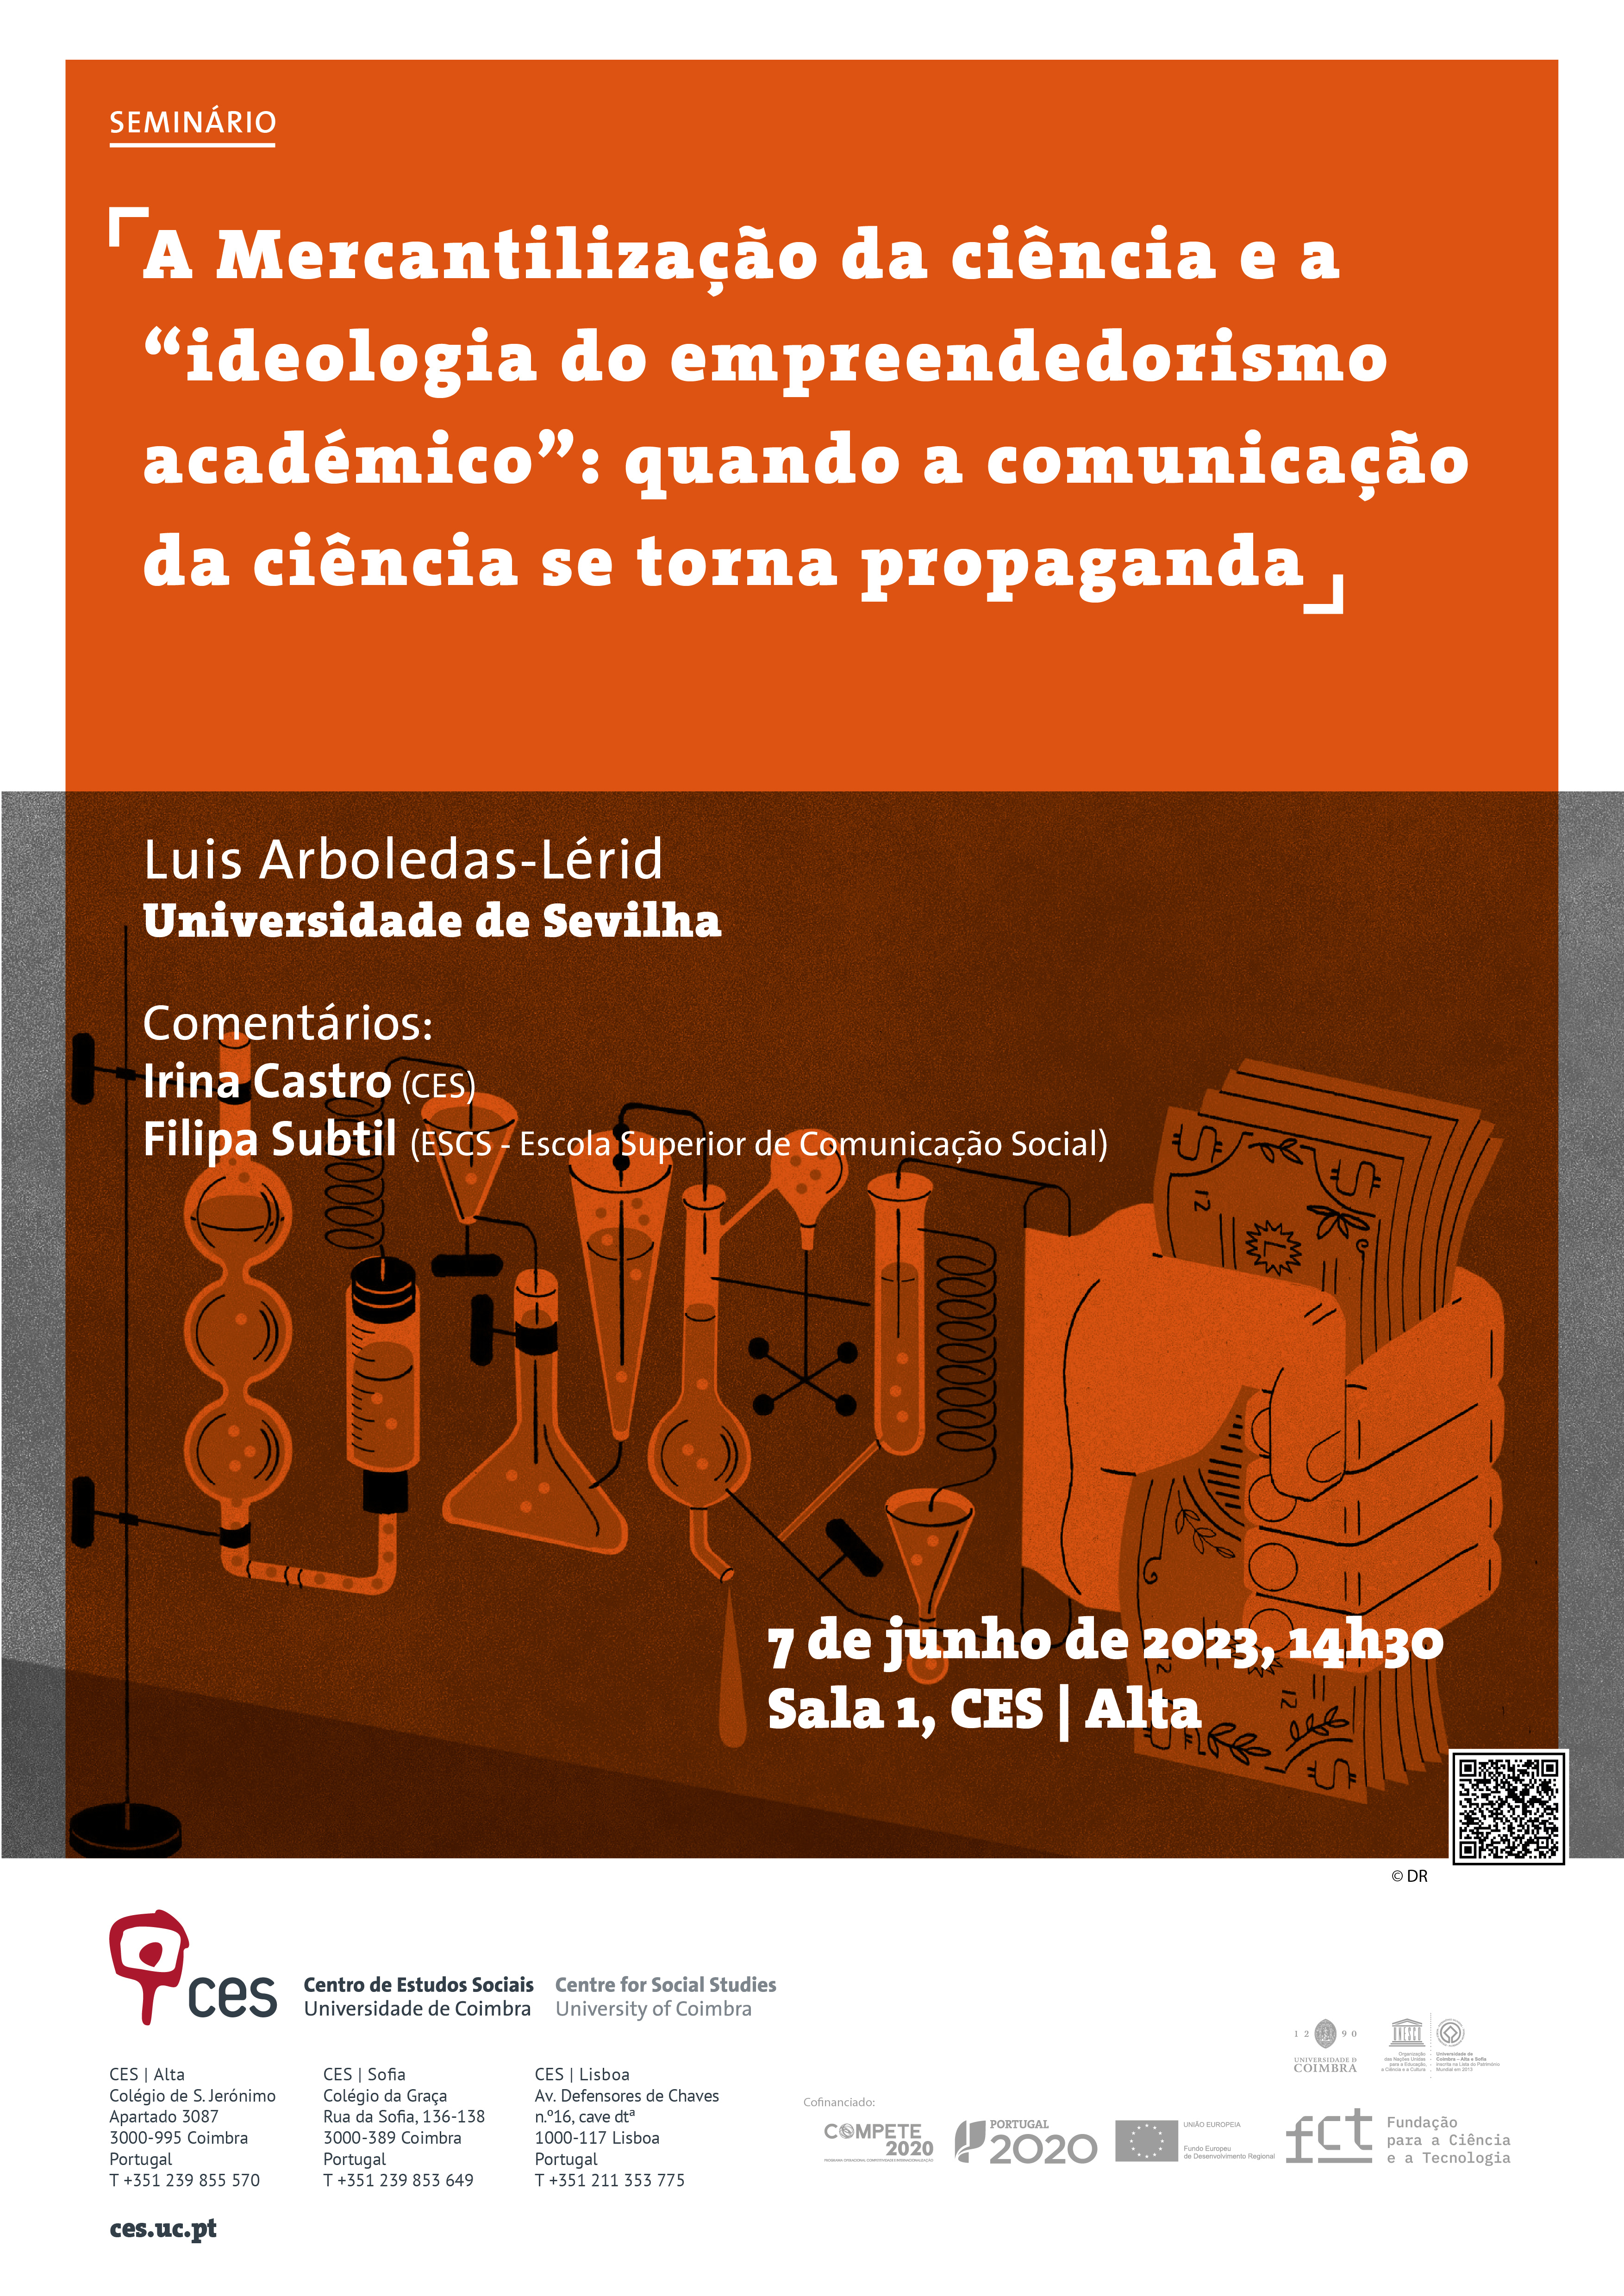 The commodification of science and the “ideology of academic entrepreneurship”: when science communication becomes propaganda<span id="edit_42817"><script>$(function() { $('#edit_42817').load( "/myces/user/editobj.php?tipo=evento&id=42817" ); });</script></span>